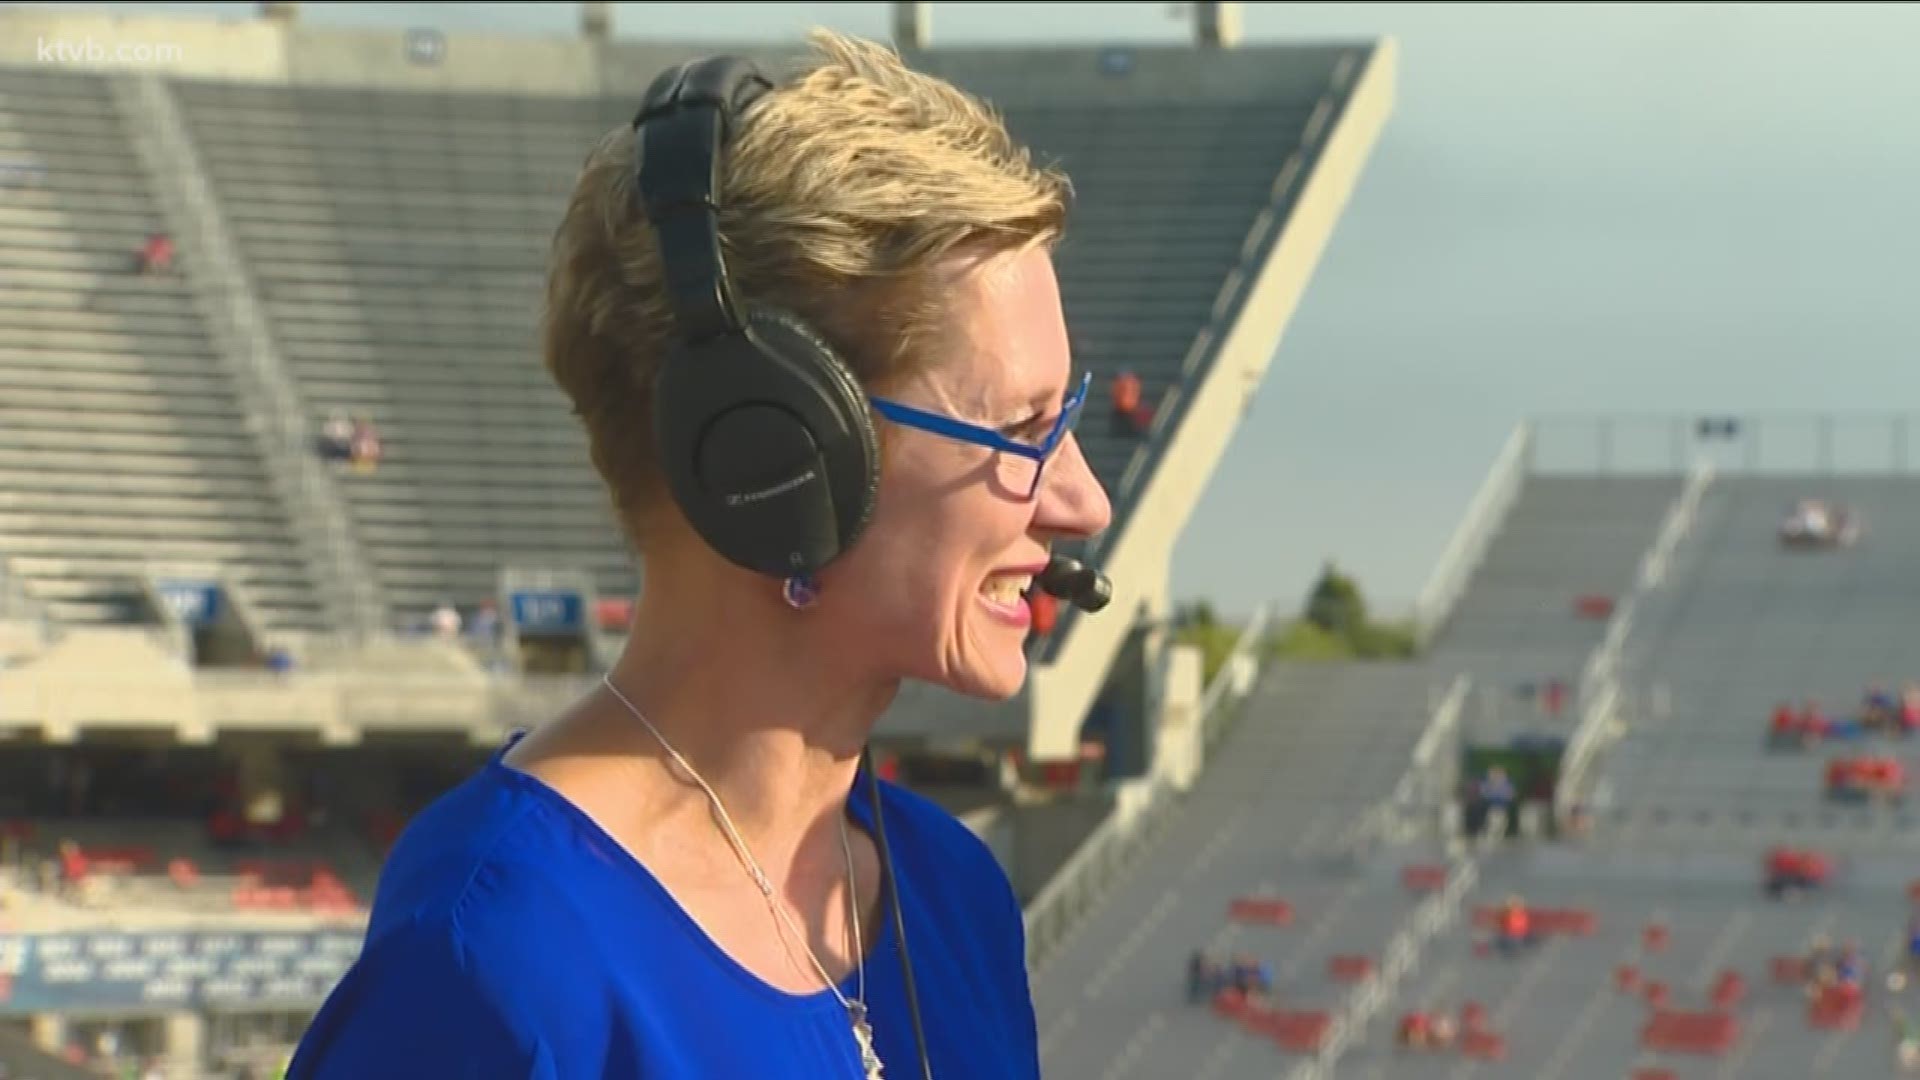 Boise State President Marlene Tromp joins Jay Tust and Will Hall to discuss what her first gameday in Albertsons Stadium is like, and what the Broncos being ranked in the Top 25 means for the university.